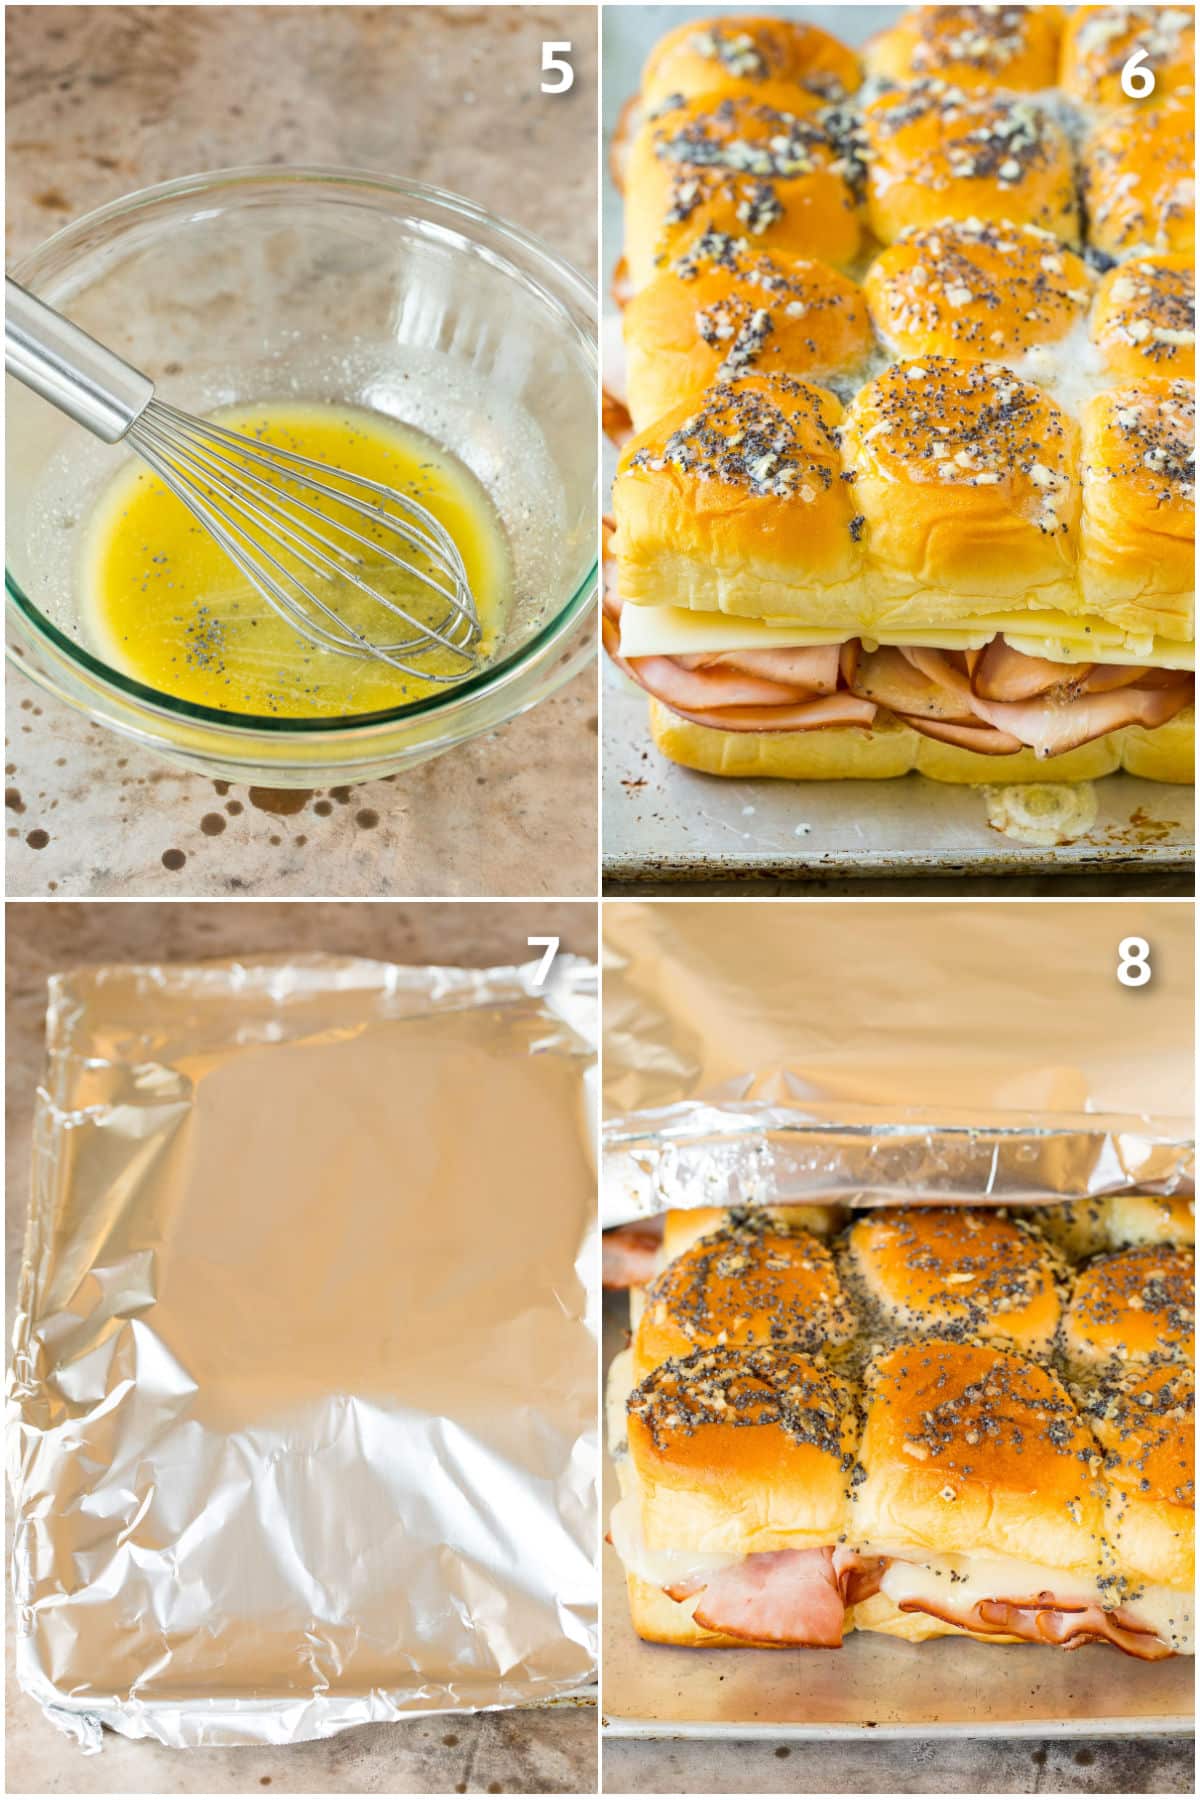 Step by step shots showing how to make seasoned butter and bake sandwiches.